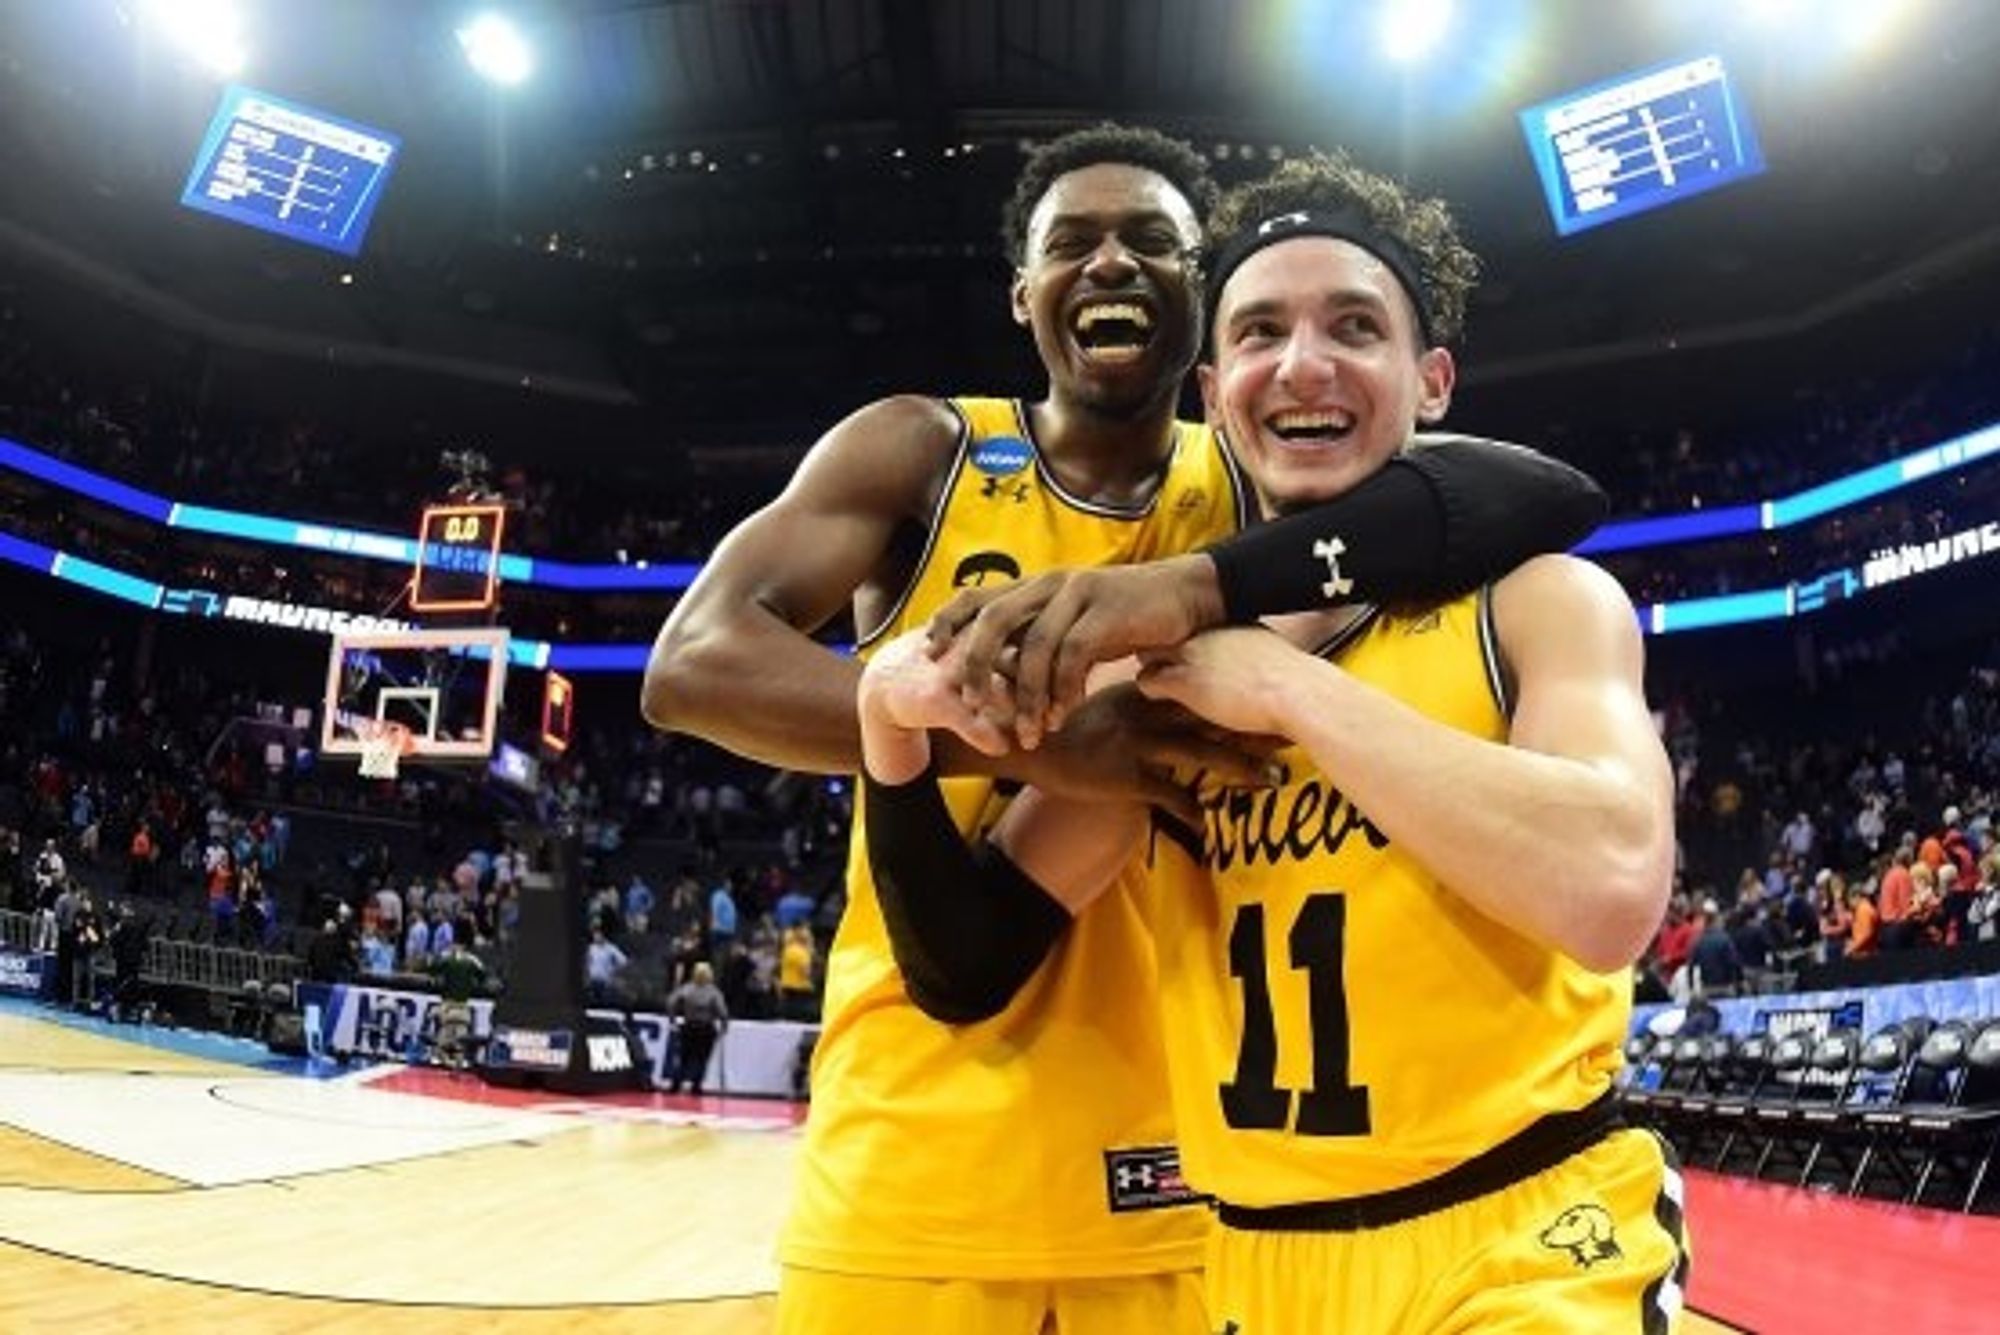 The Option Umbc Is The Best Sports Story Of 2018 Popdust